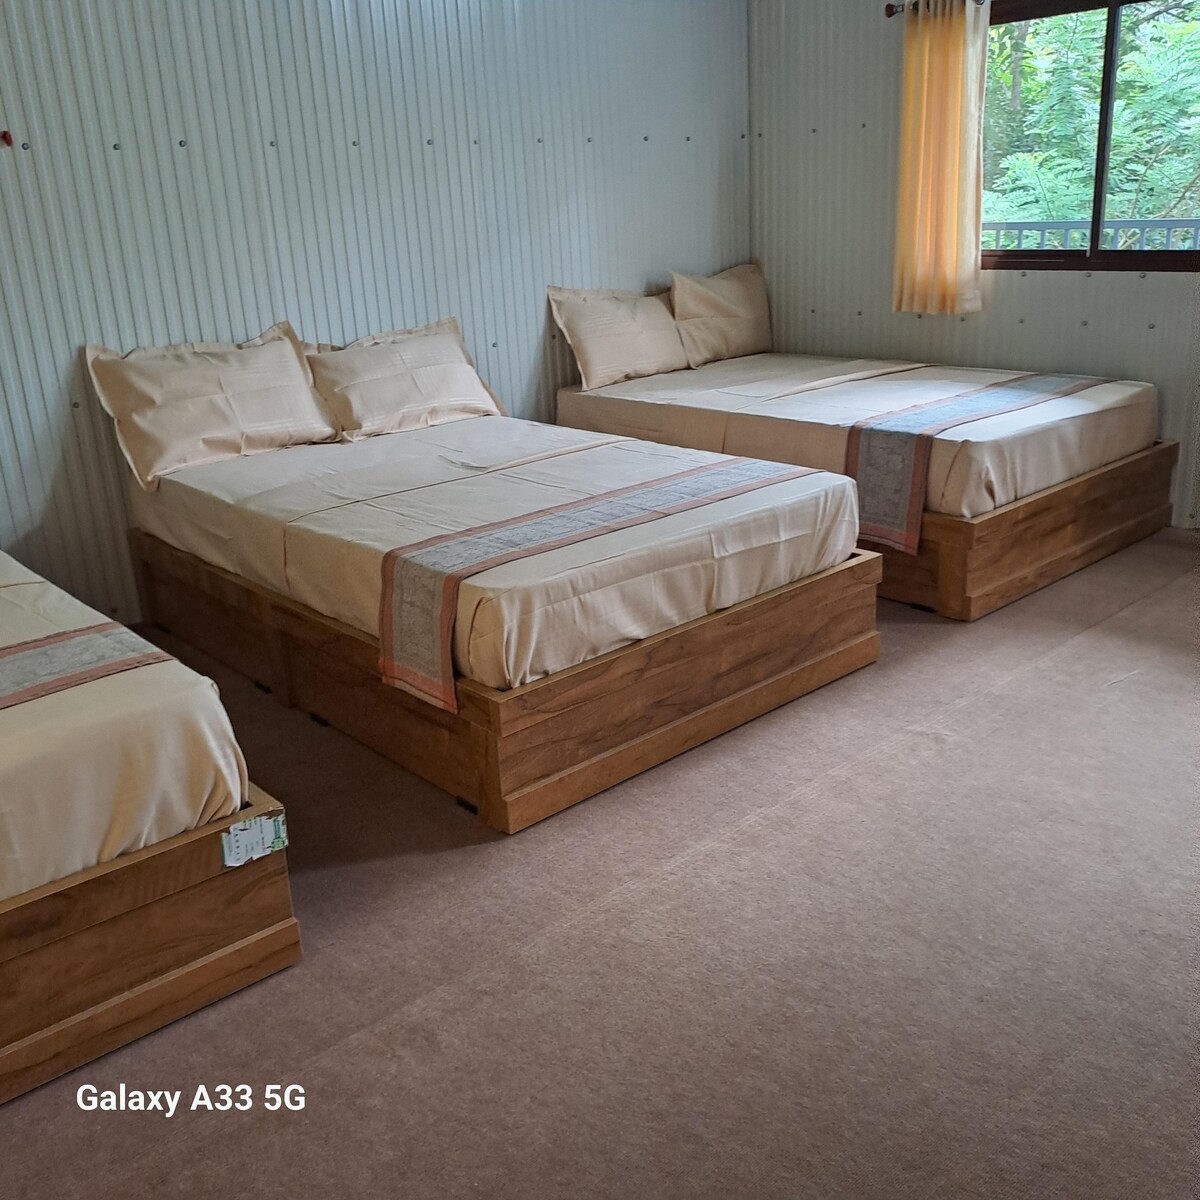 3 BHK Forest camping House